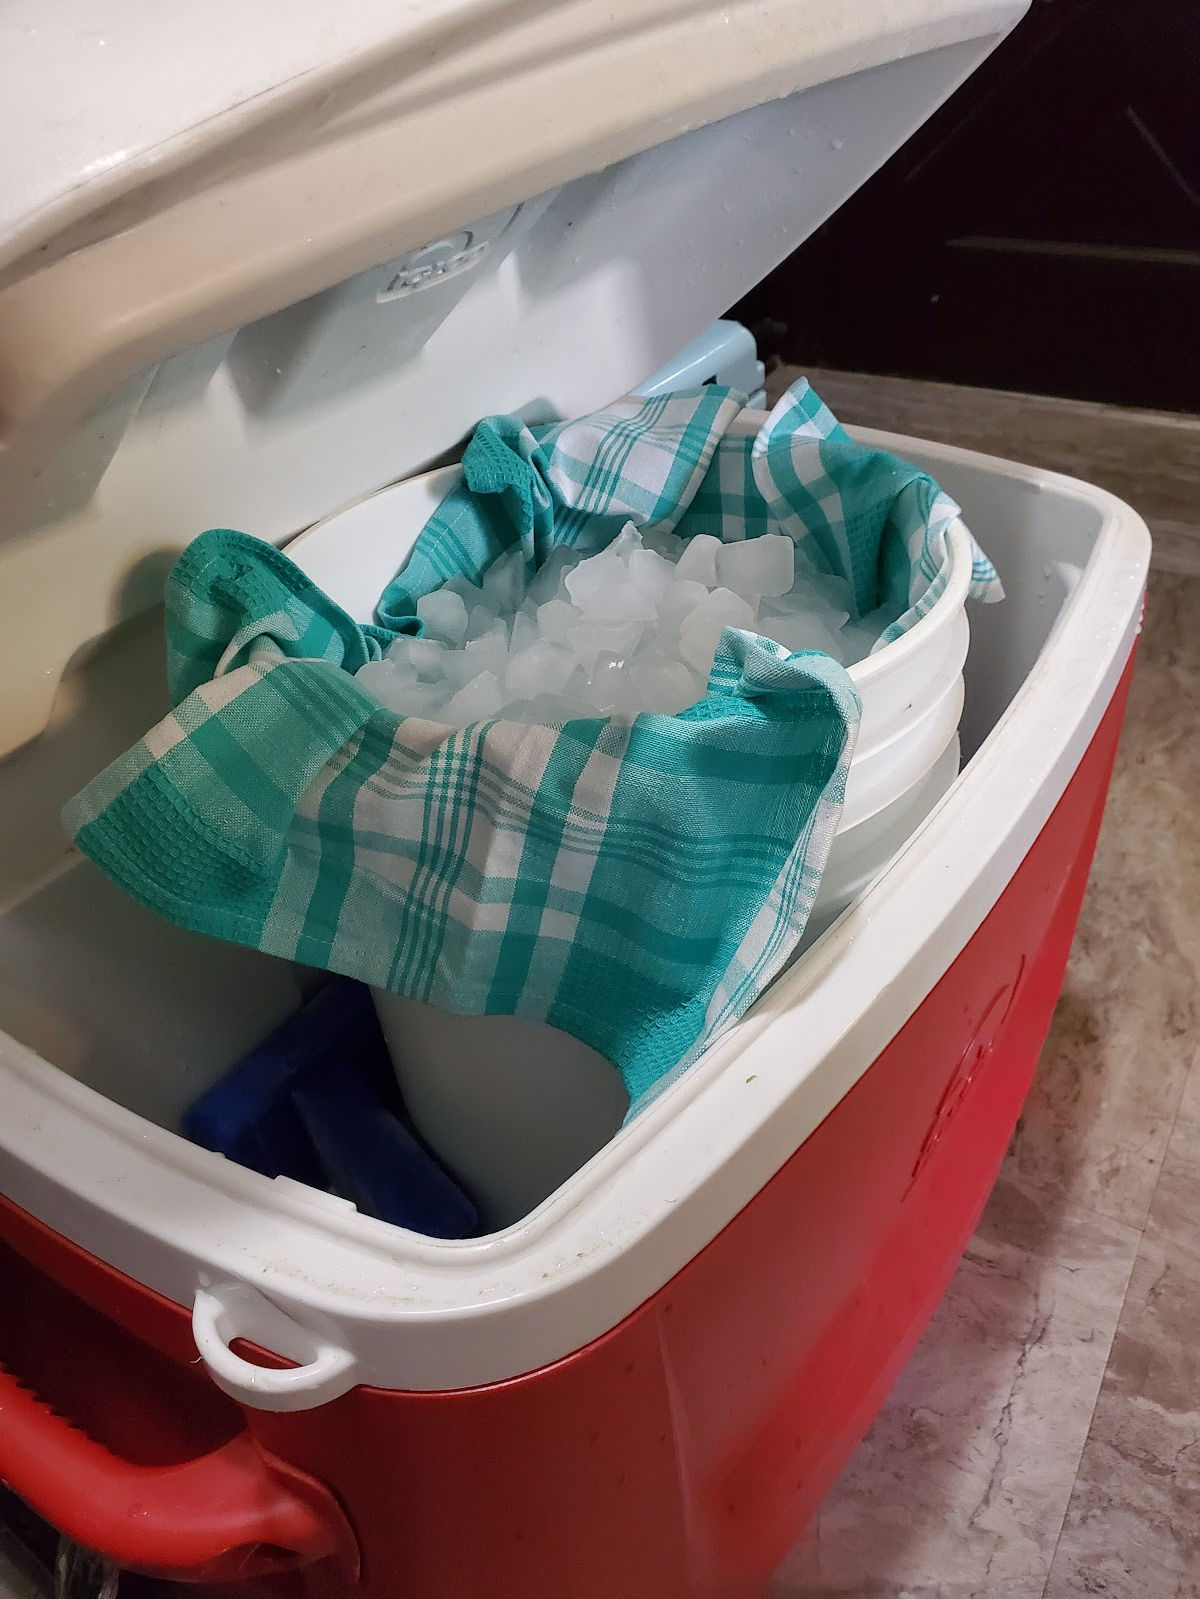 Red cooler with white top, white 5-gallon bucket inside cooler with teal green checkered dish cloth and ice on top.